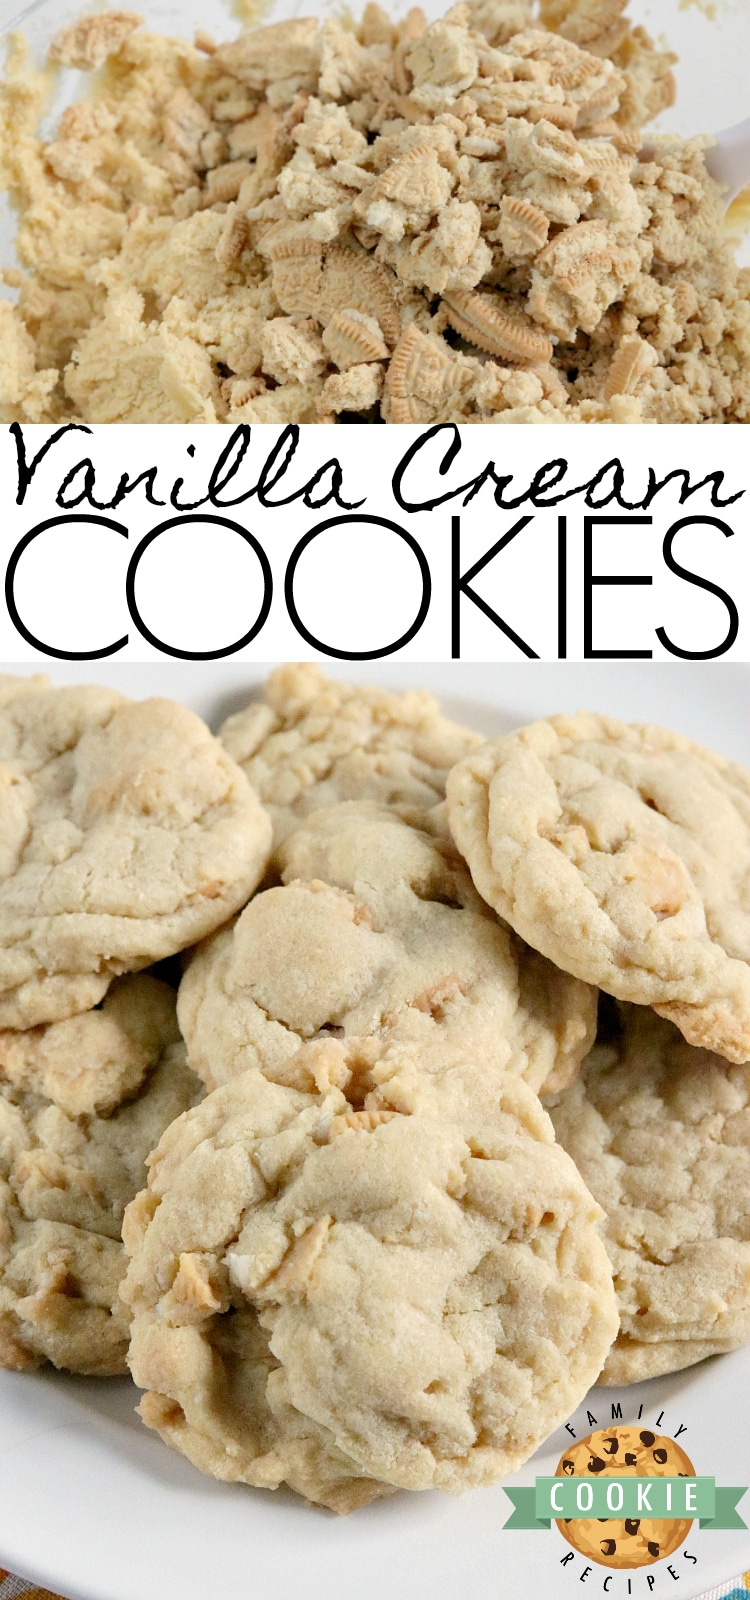 Vanilla Cream Cookies are soft, chewy and full of vanilla flavor. This simple cookie recipe is made with vanilla pudding mix and lots of crushed Golden Oreos - they are amazing!